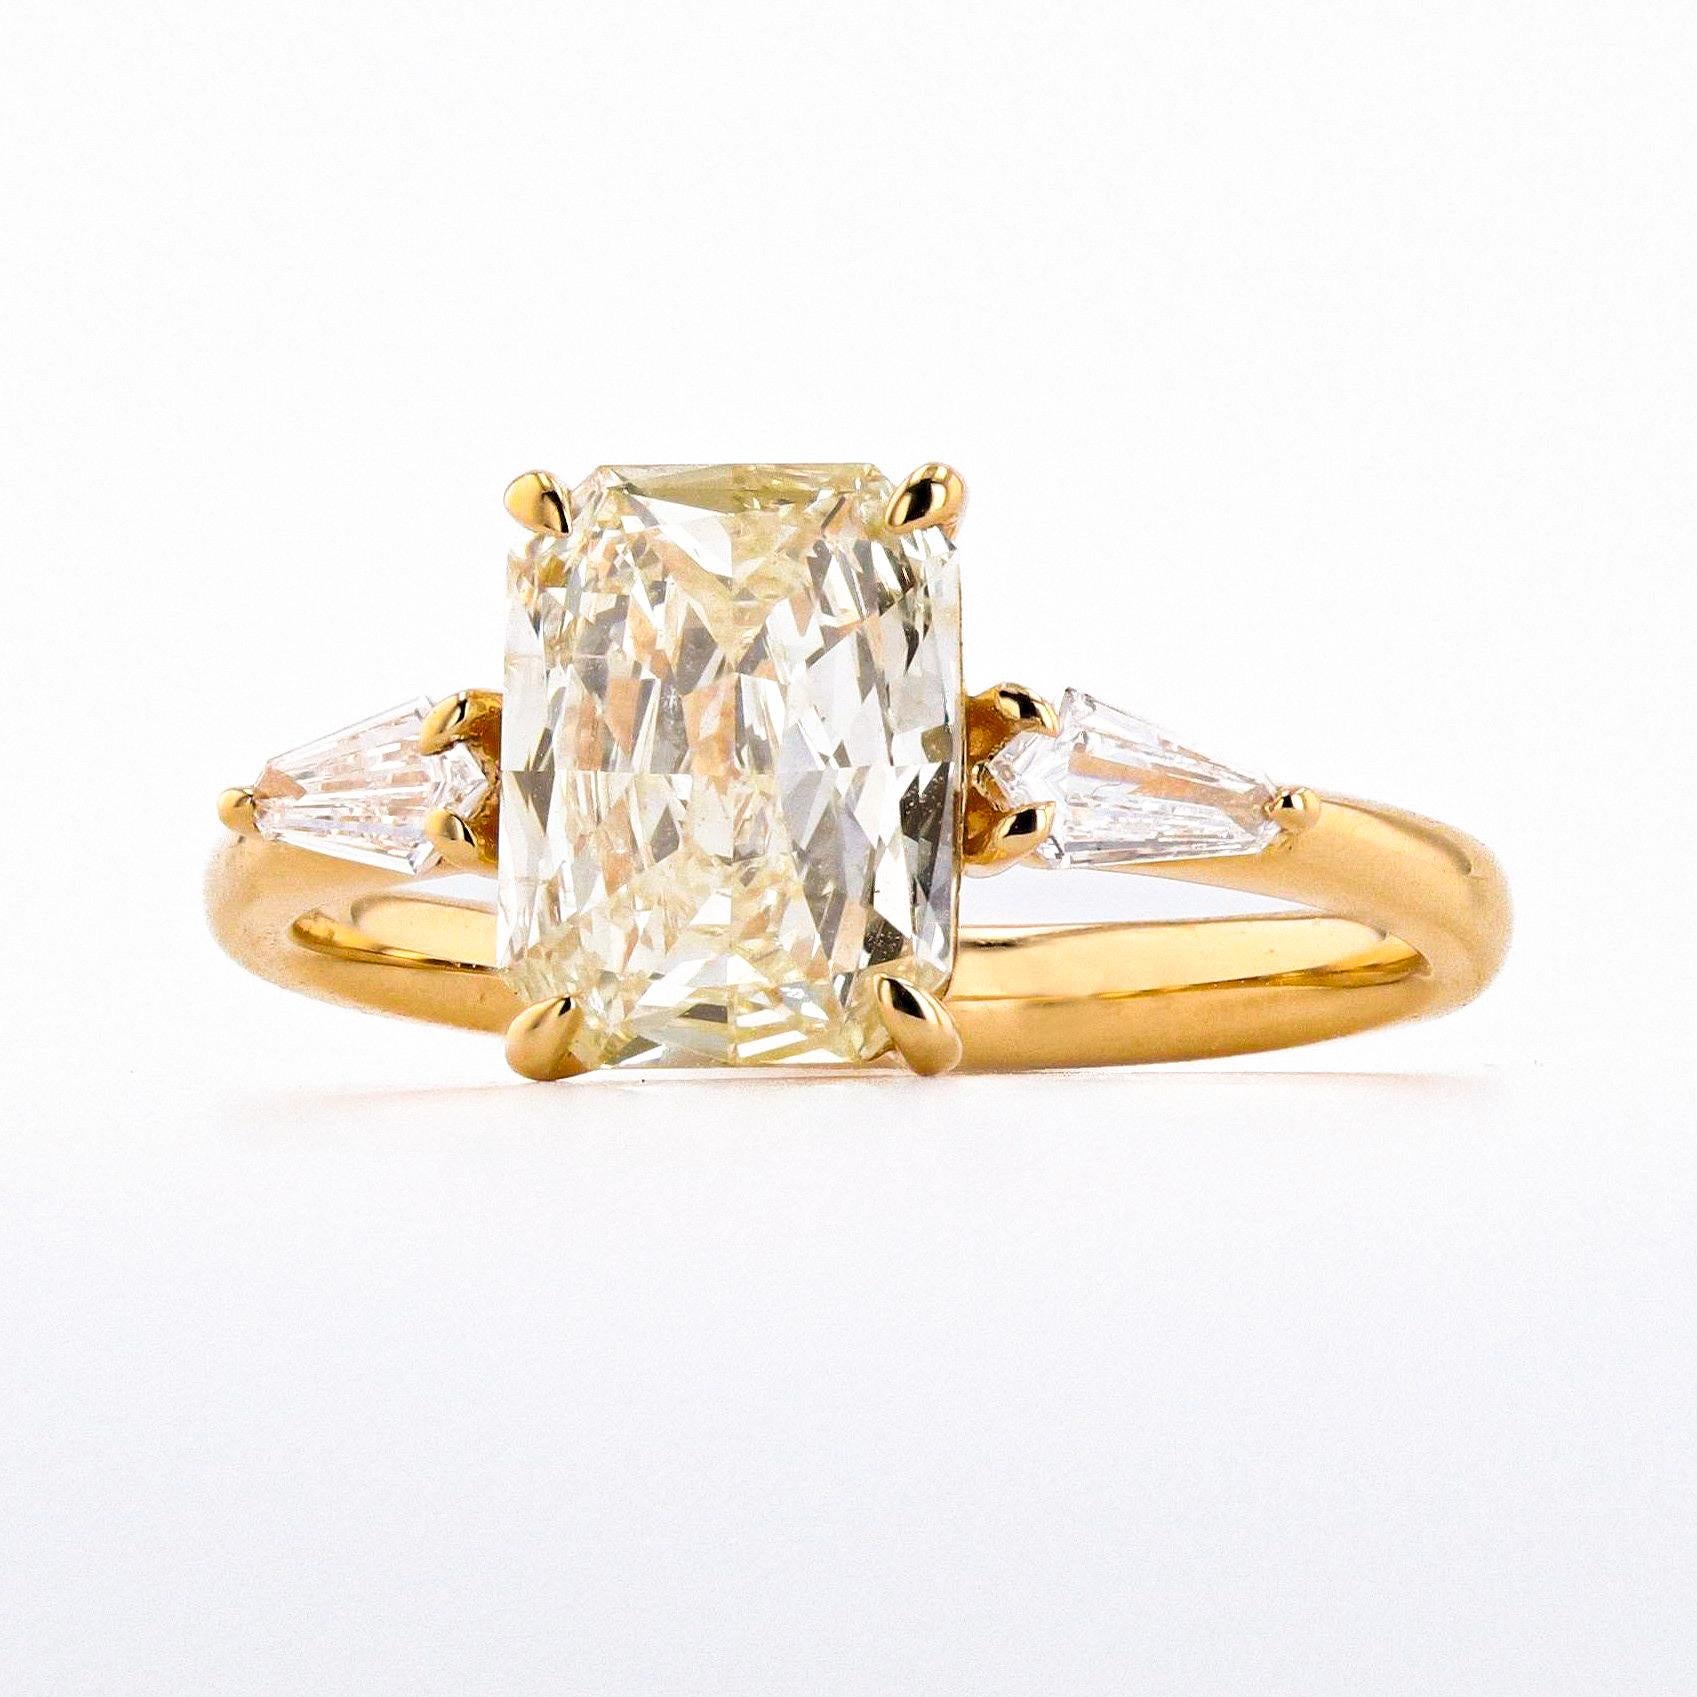 Introducing a breathtaking ring featuring a stunning 1.70 carat champagne diamond and two elegant .18 carat shield cut side stones. This piece is a true masterpiece, with a unique and alluring color that is sure to captivate anyone who appreciates